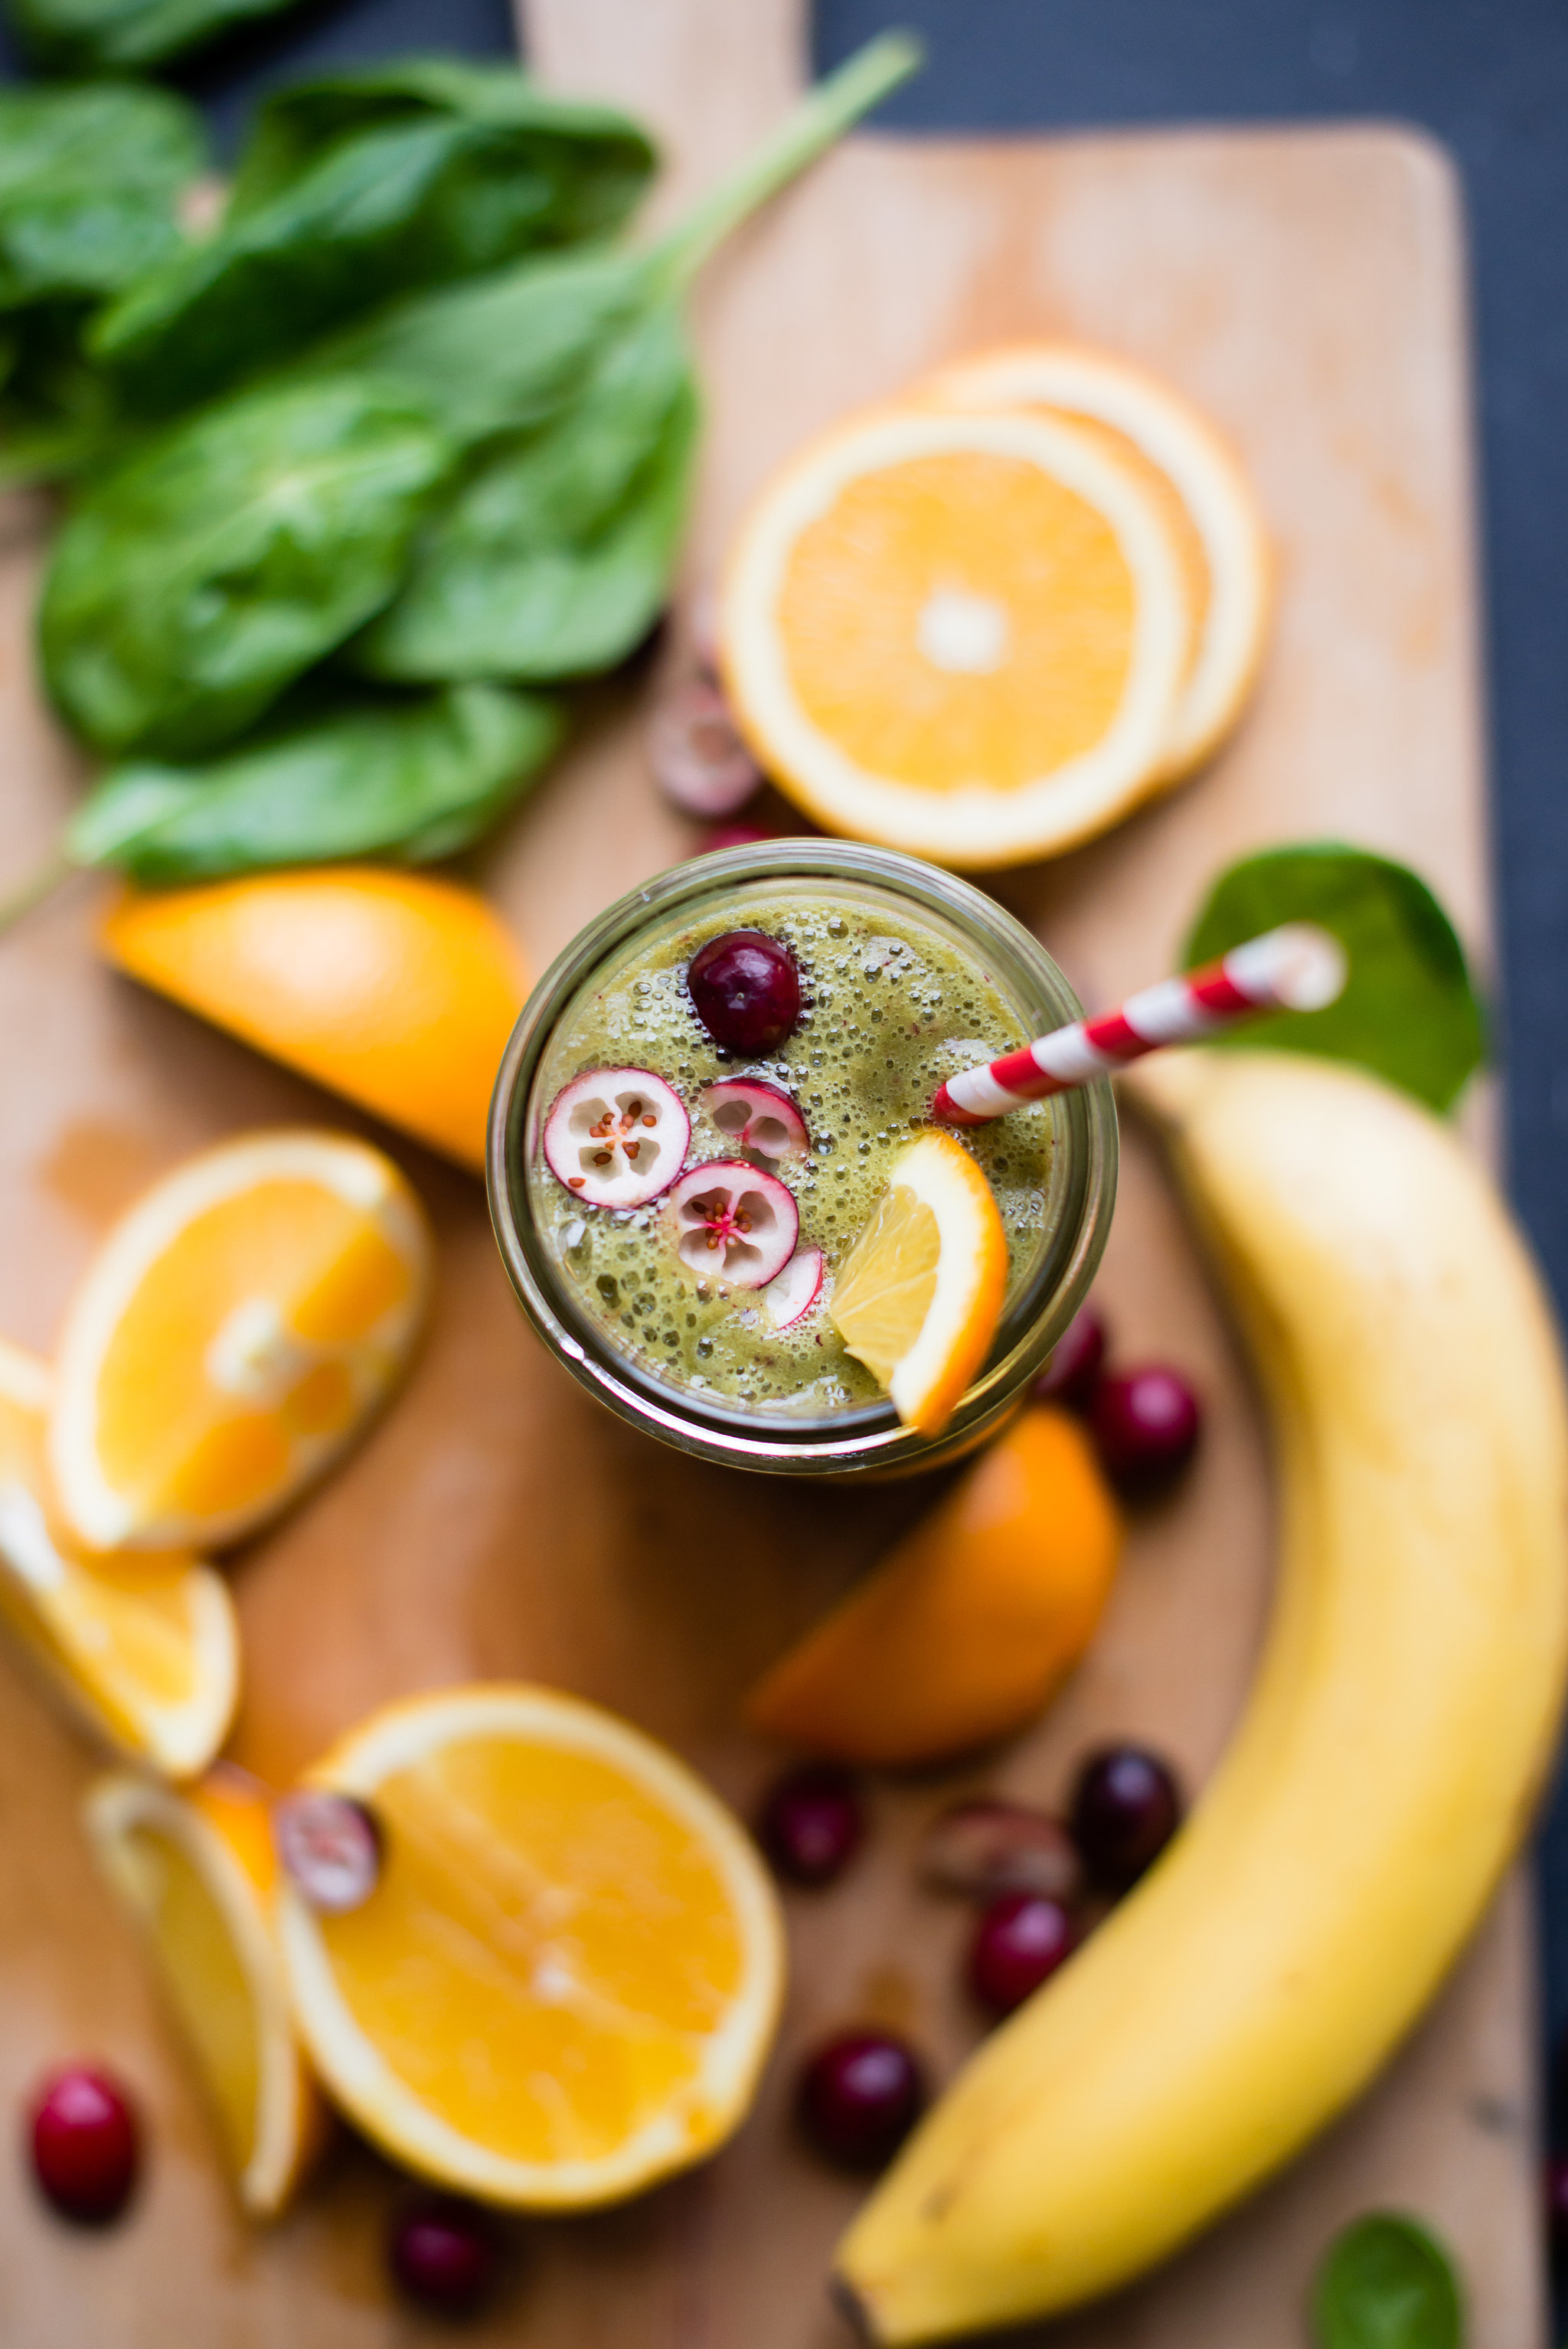 This Immunity-Boosting, Fiber-Filled Smoothie Is the Perfect Midday Snack